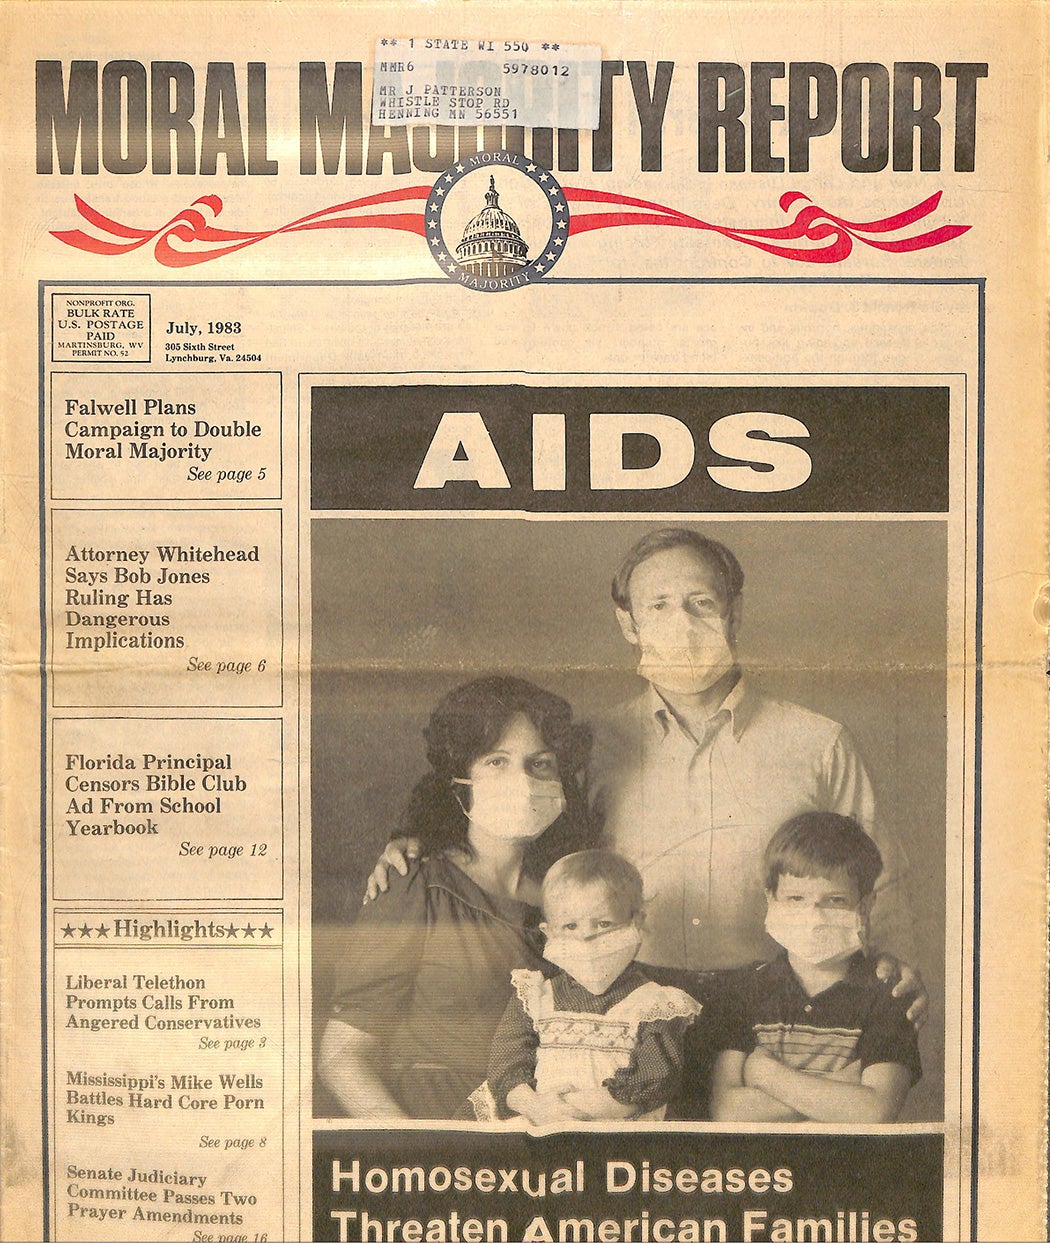 The Moral Majority Report July 1983